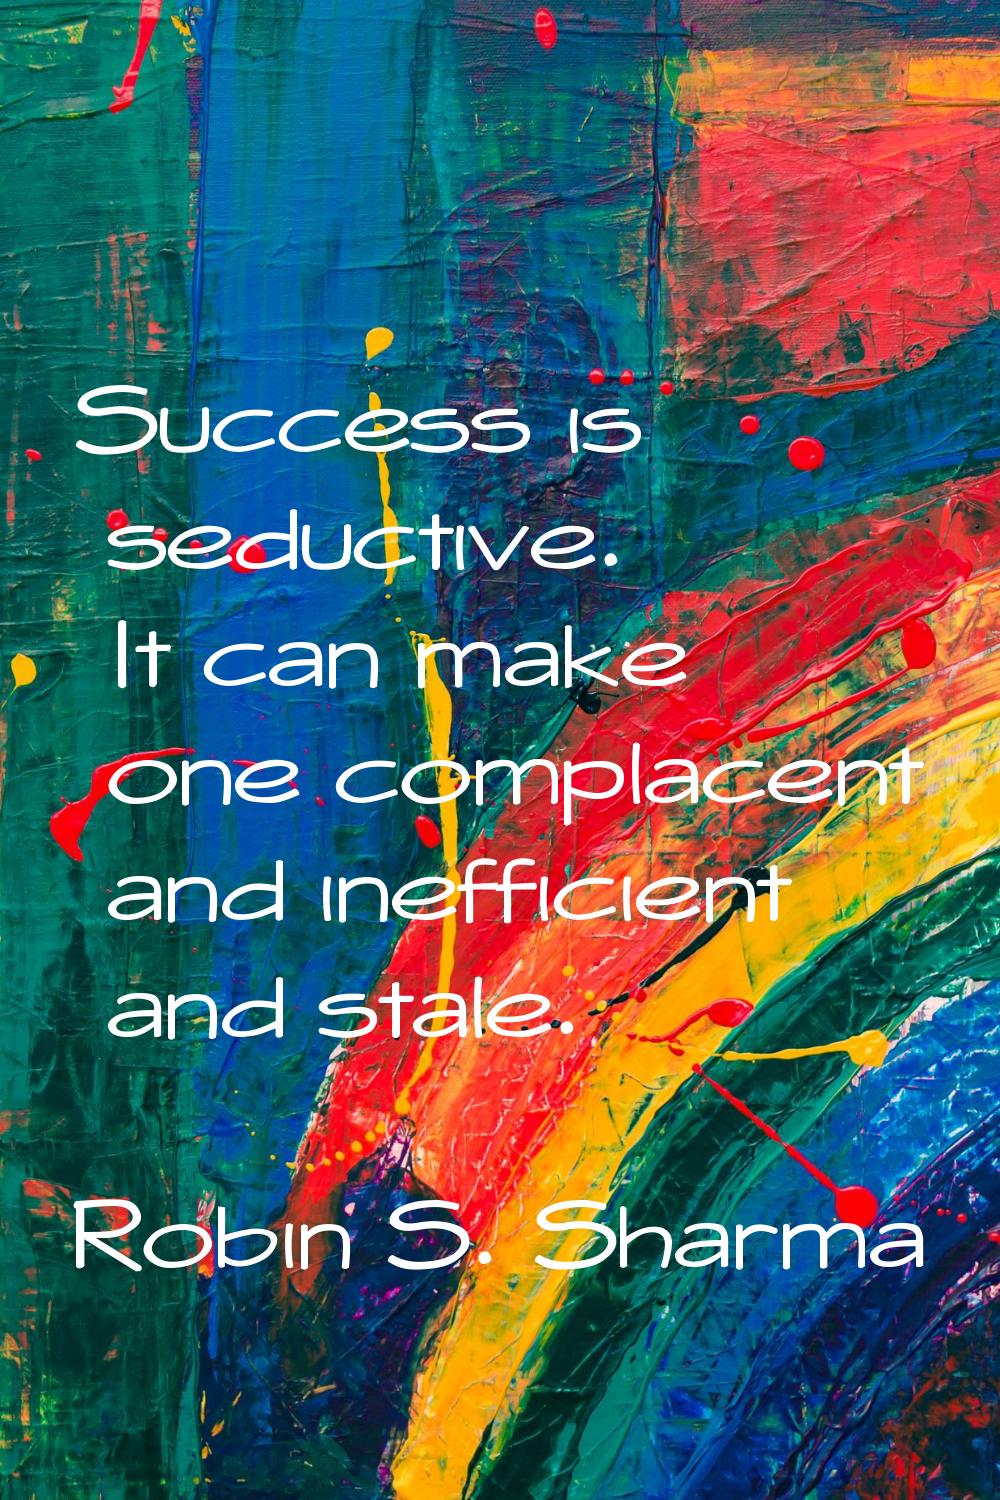 Success is seductive. It can make one complacent and inefficient and stale.